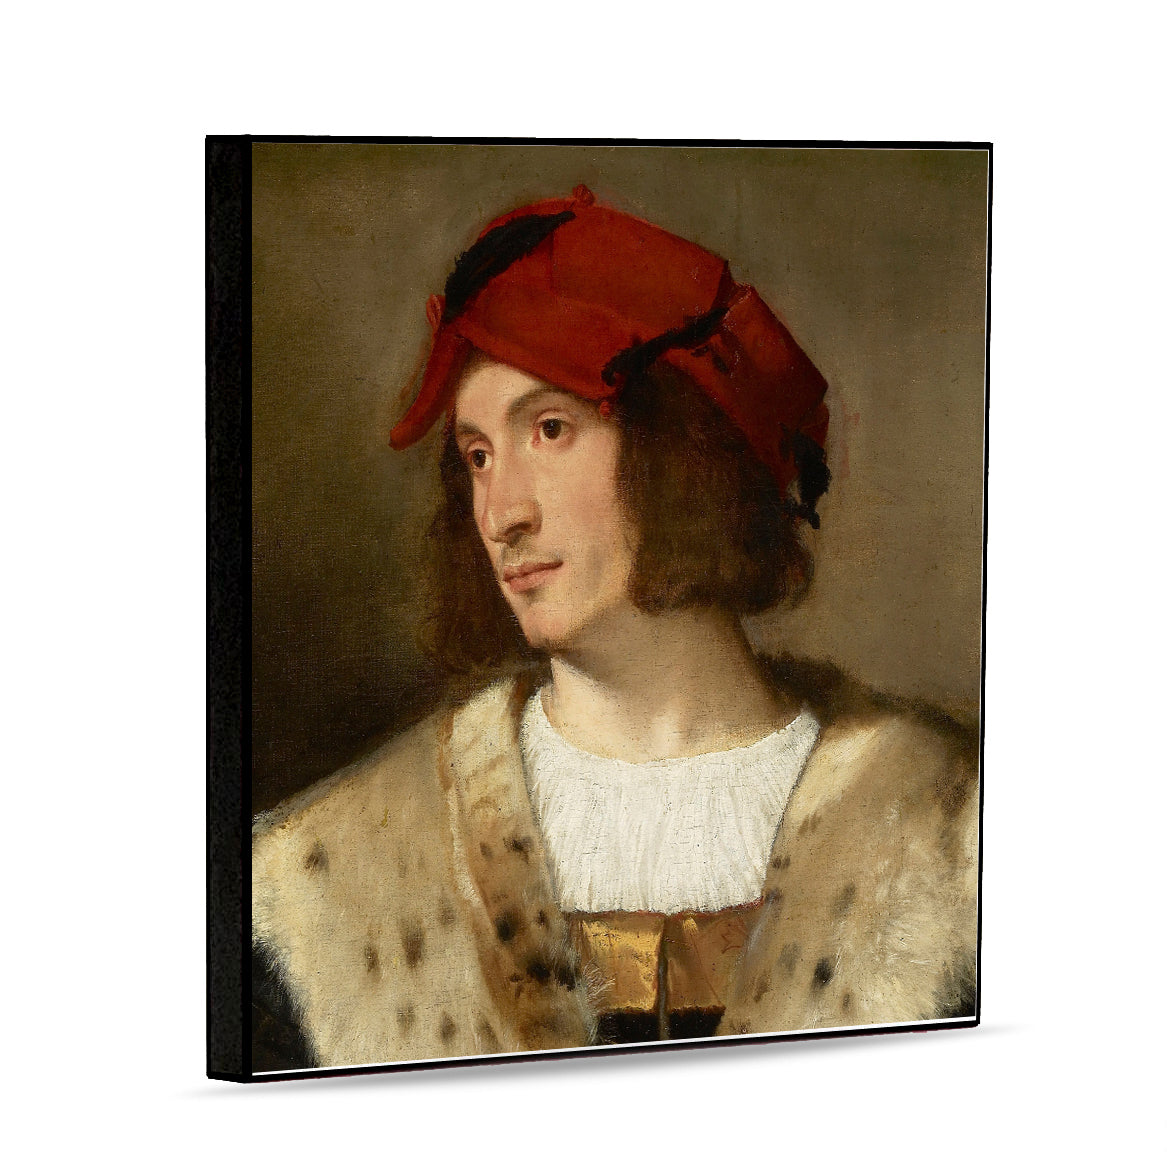 AFFRESCO: Panel Tile - Opera "Man in red hat" by Tiziano (Titian)